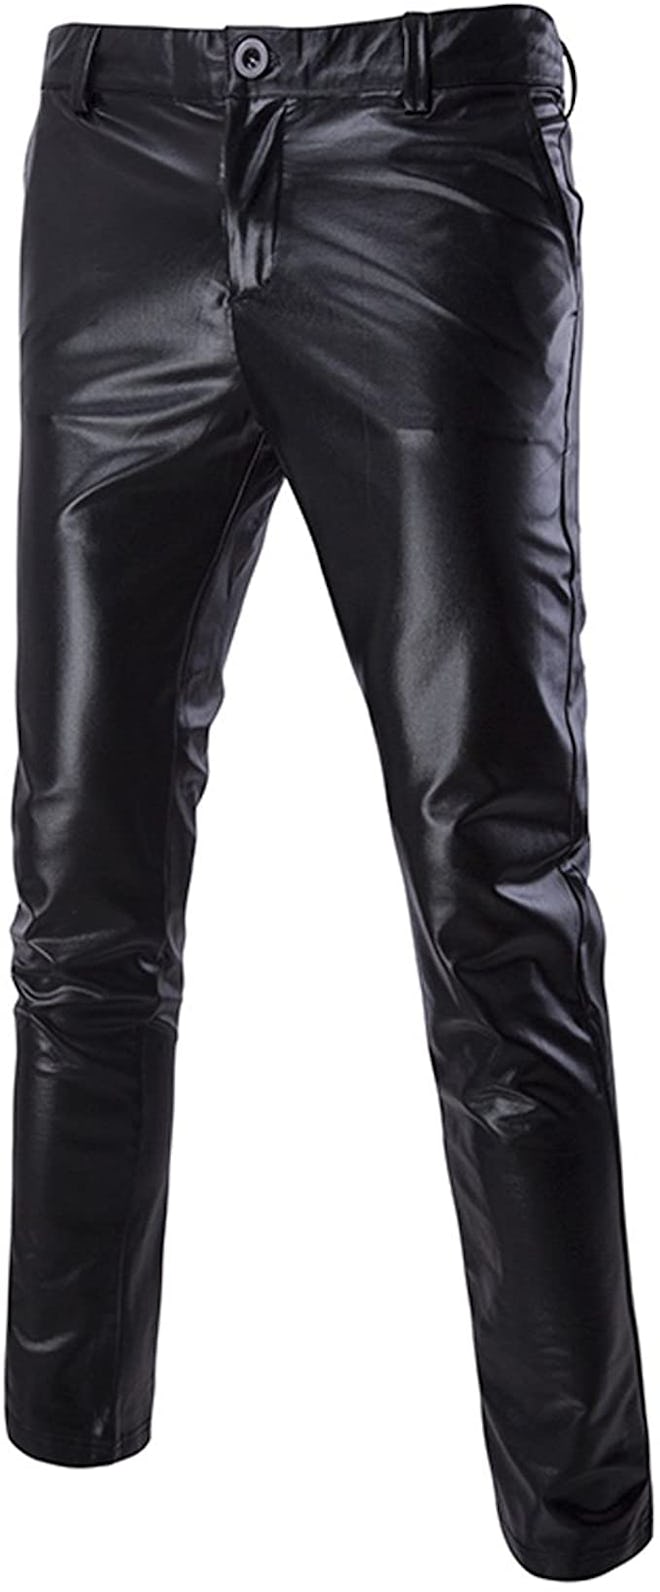 Men's Casual Trousers